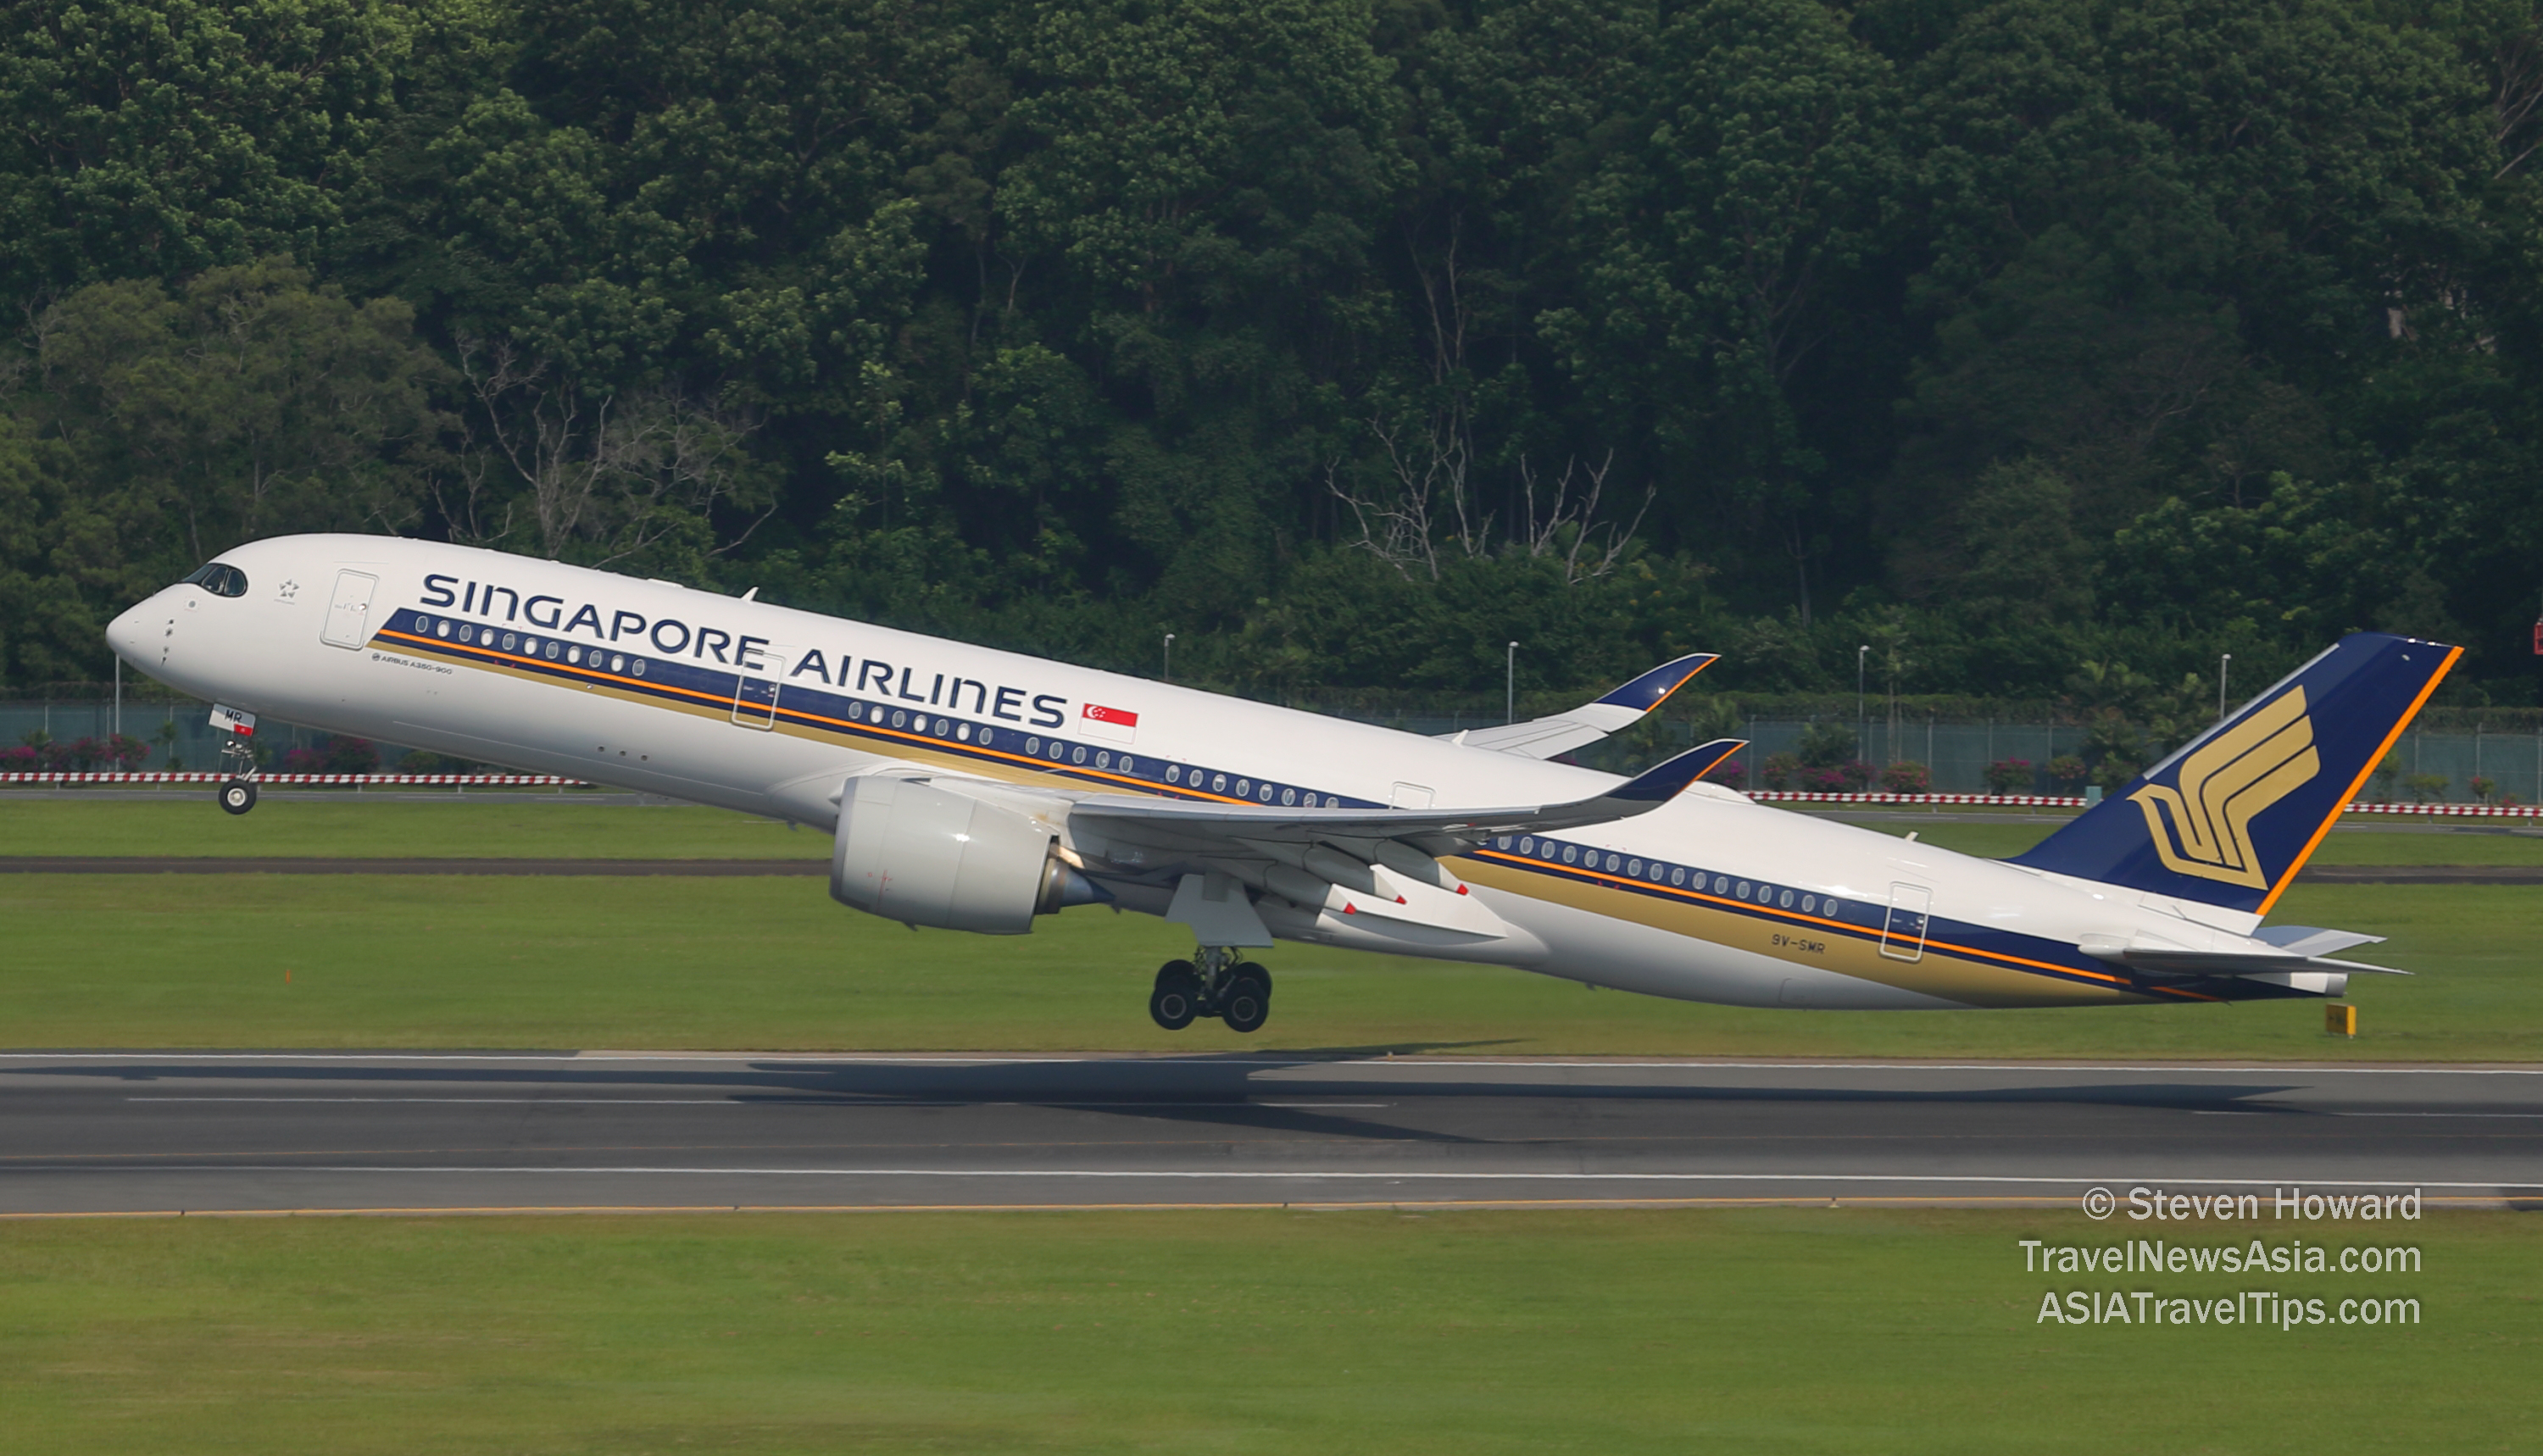 Singapore Airlines Airbus A350-900 reg: 9V-SMR. Picture by Steven Howard of TravelNewsAsia.com. Click to enlarge.